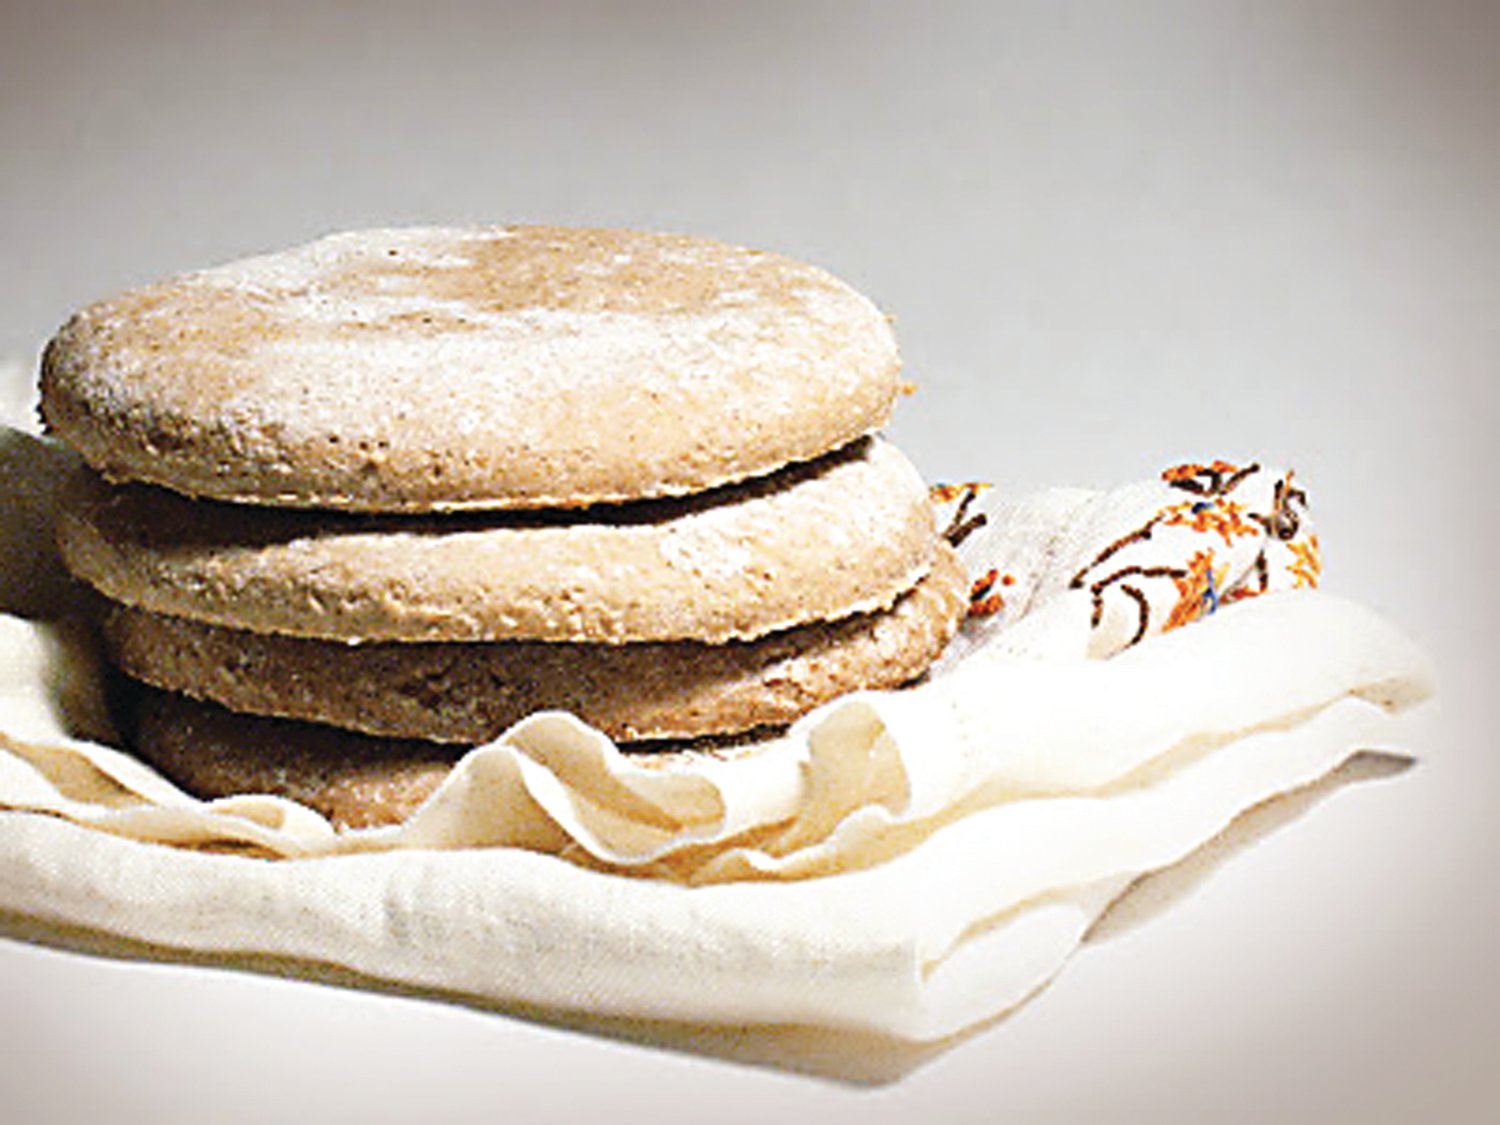 Apees, a spiced Pennsylvania Dutch cookie, was reported to be a favorite of President James Buchanan, who hailed from the Keystone State. Photograph by Globalcookies.blogspot.com.